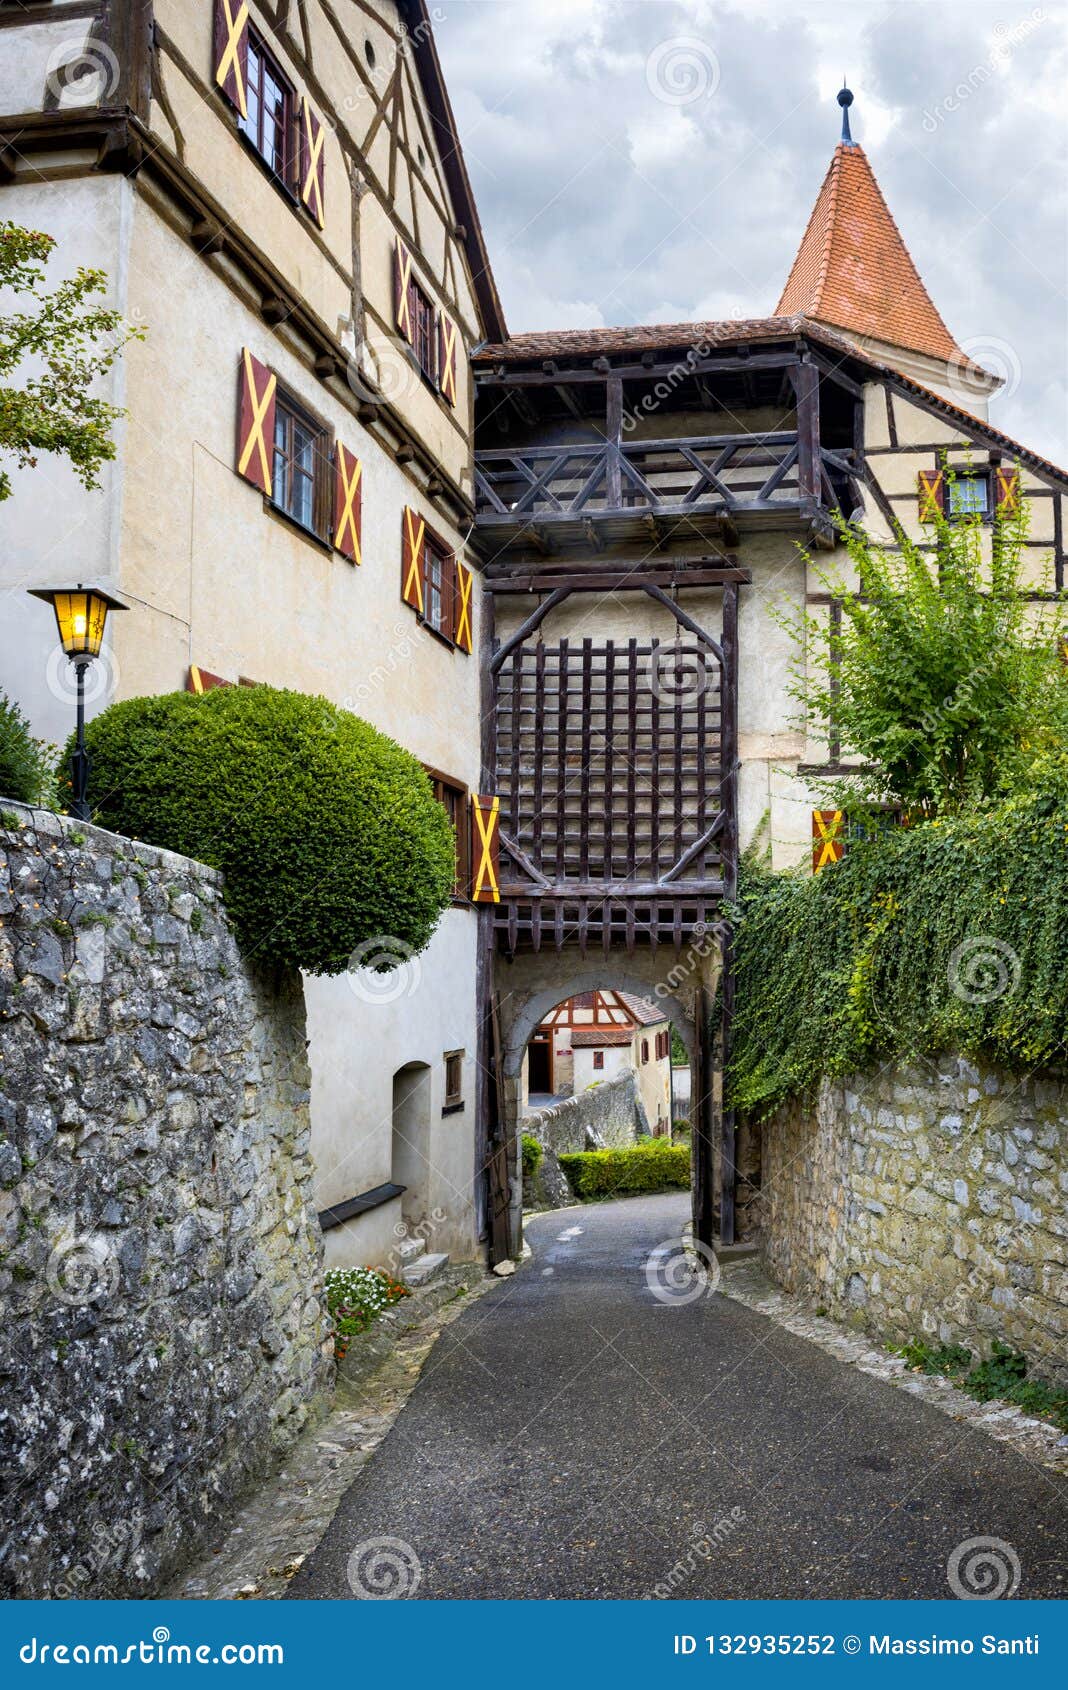 harburg - part of the interior of the harburg castle in bavaria, it is a part of the scenic route called `romantic road`. germany